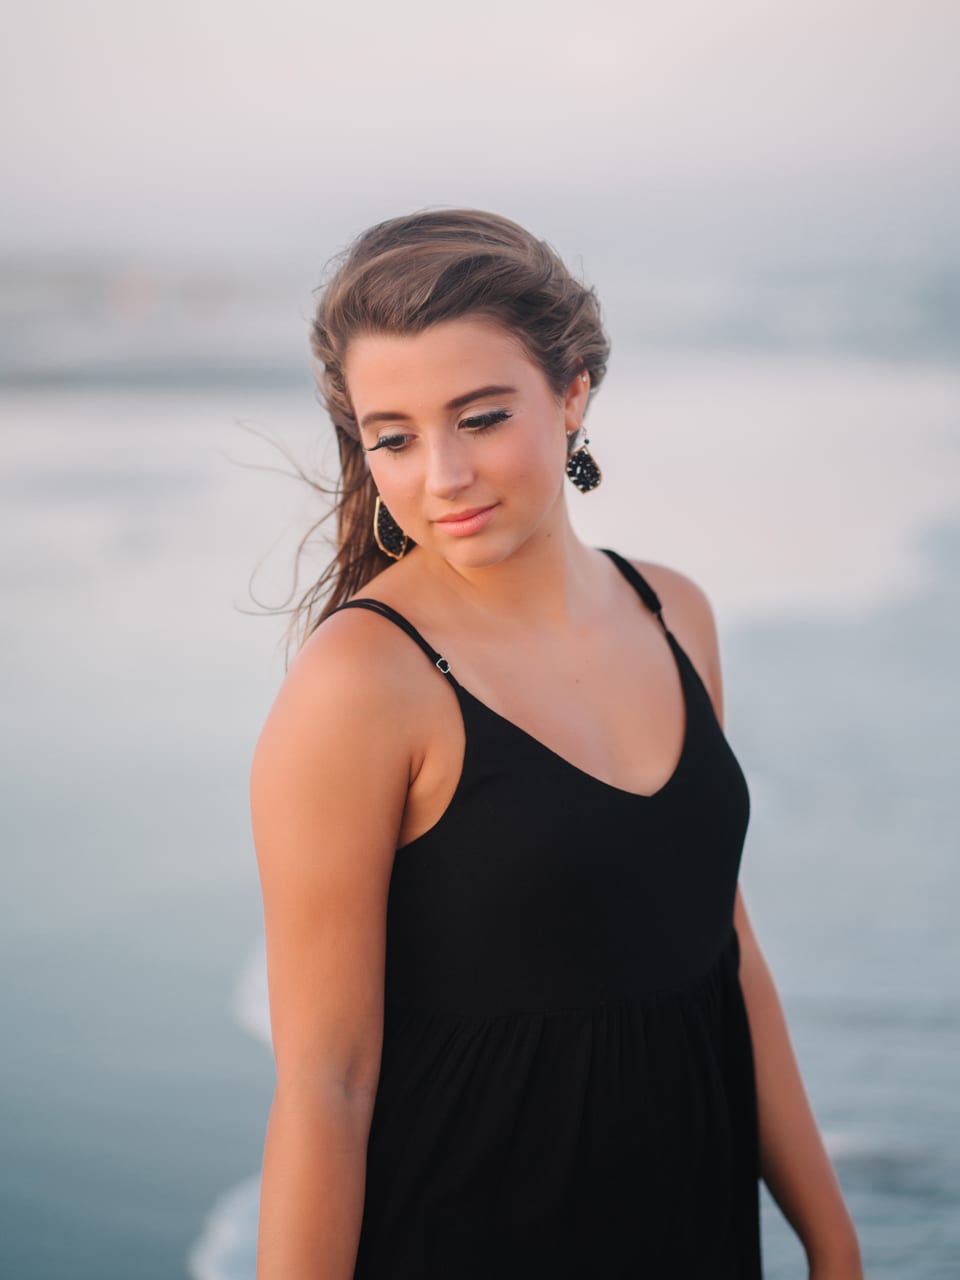 St James High School Senior Pictures and Senior Portrait Photography in Myrtle Beach